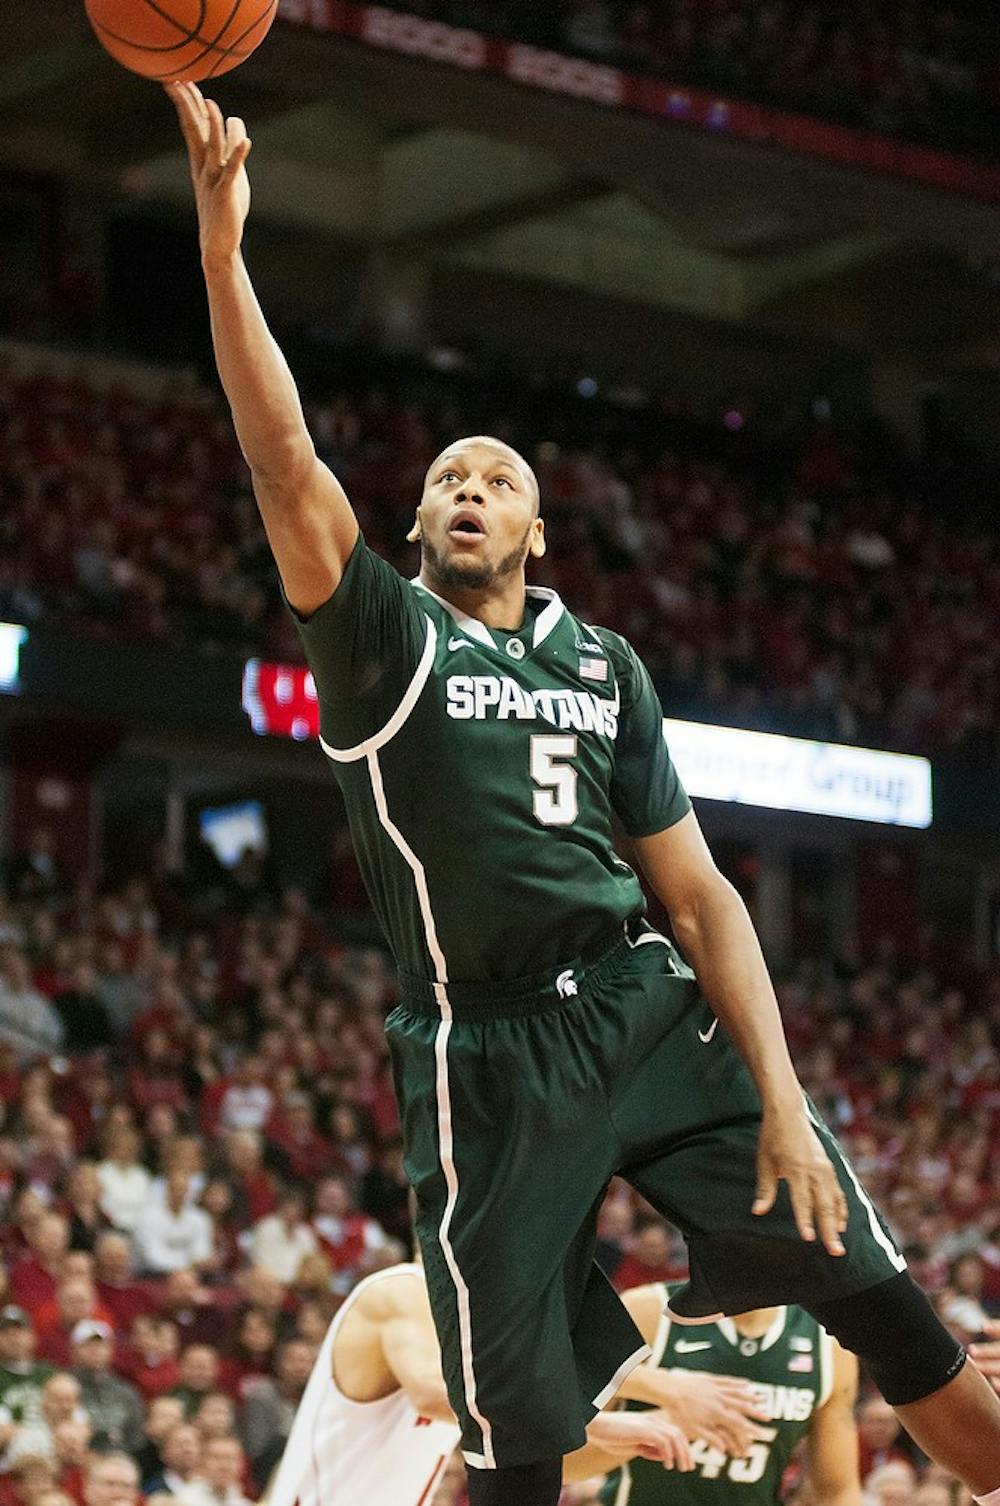 	<p>Senior center Adreian Payne takes a shot during the game against Wisconsin on Feb. 9, 2014, at Kohl Center in Madison, Wis. The Spartans lost to the Badgers, 60-58. Danyelle Morrow/The State News</p>